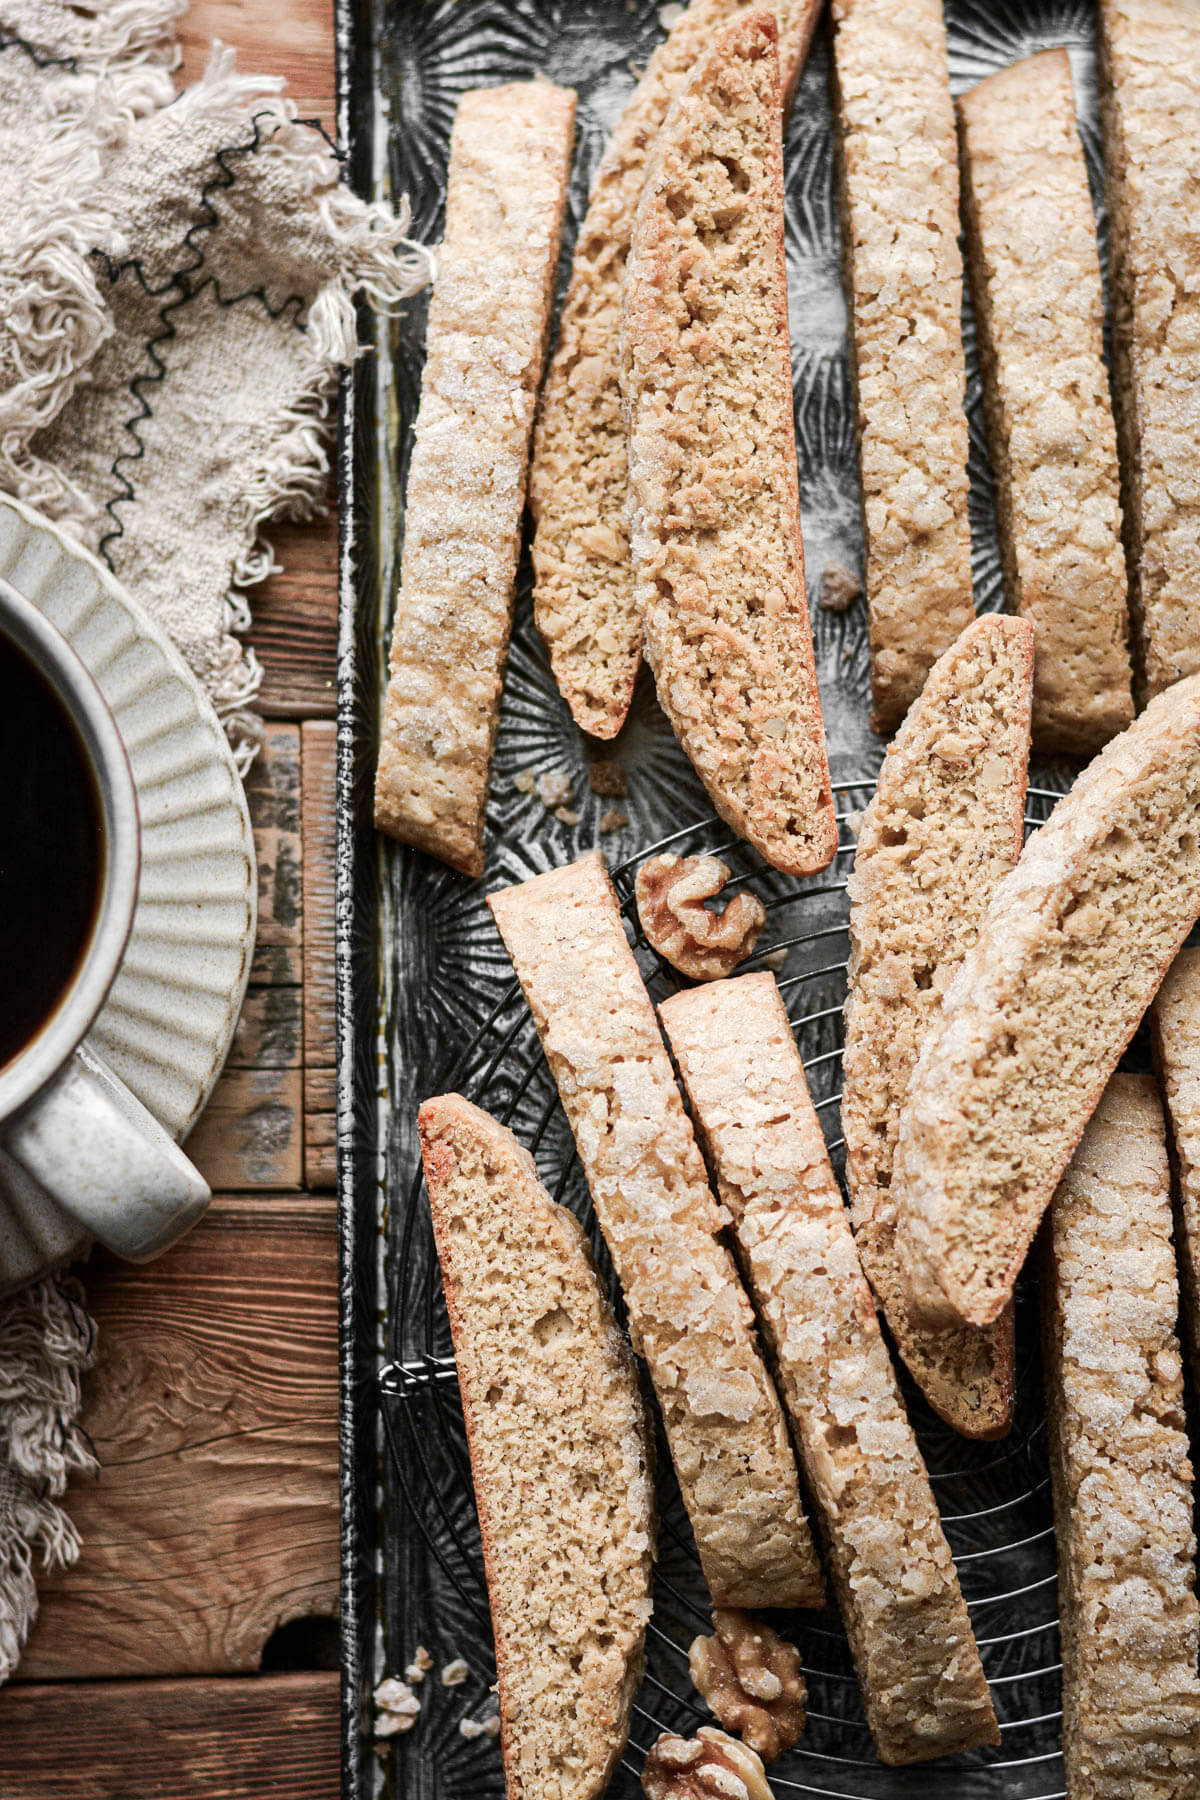 Ginger walnut biscotti next to a cup of coffee.